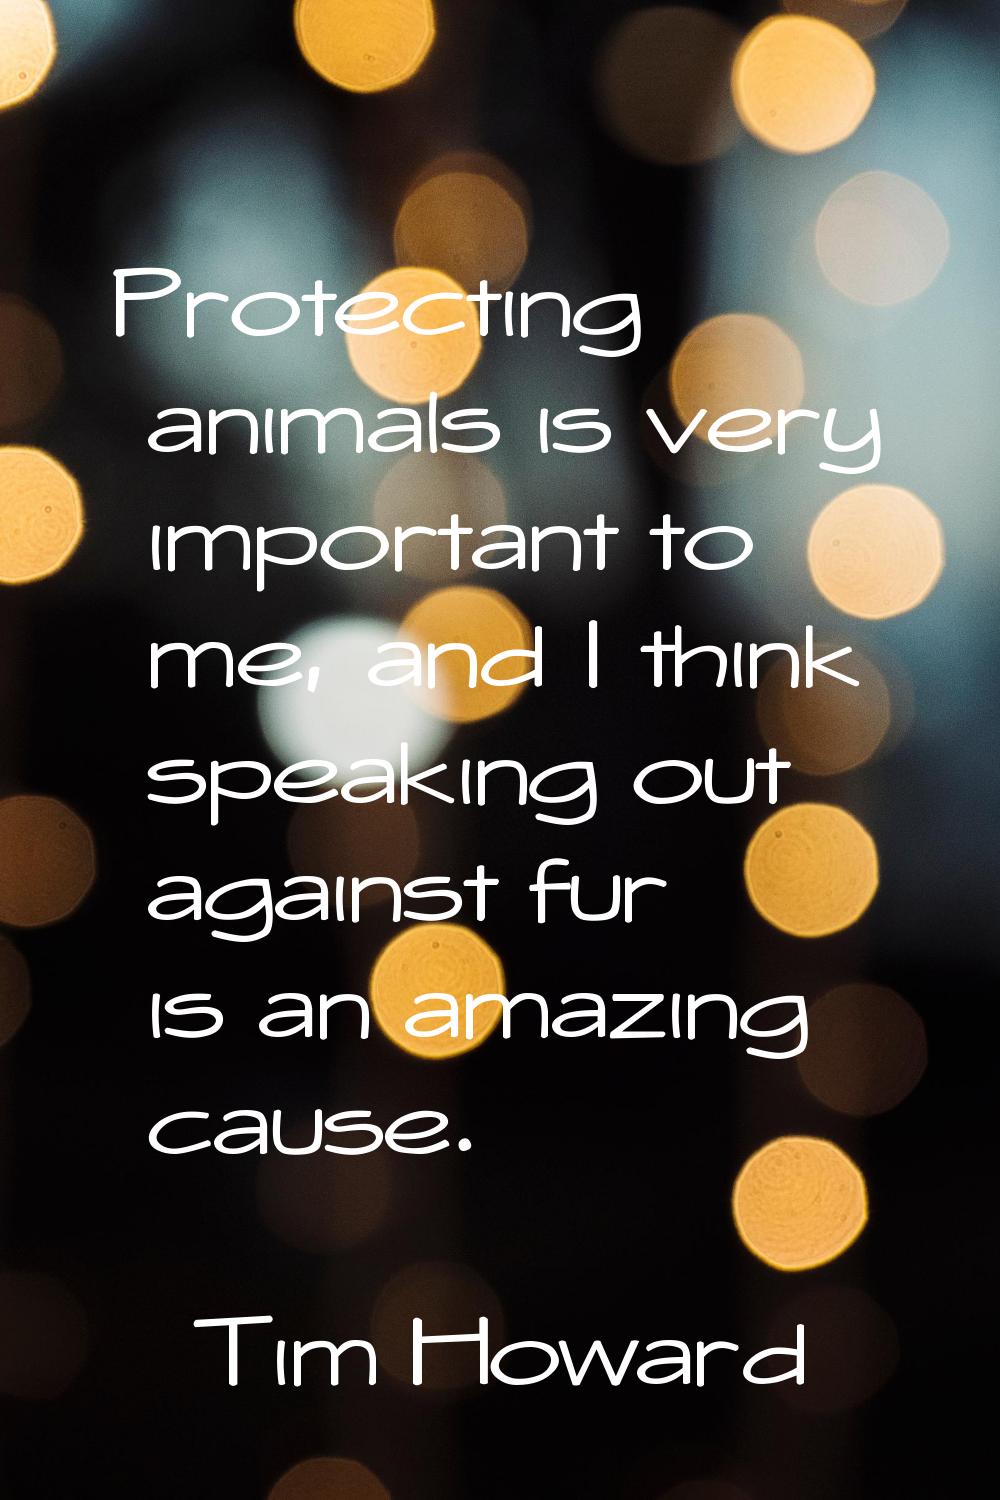 Protecting animals is very important to me, and I think speaking out against fur is an amazing caus